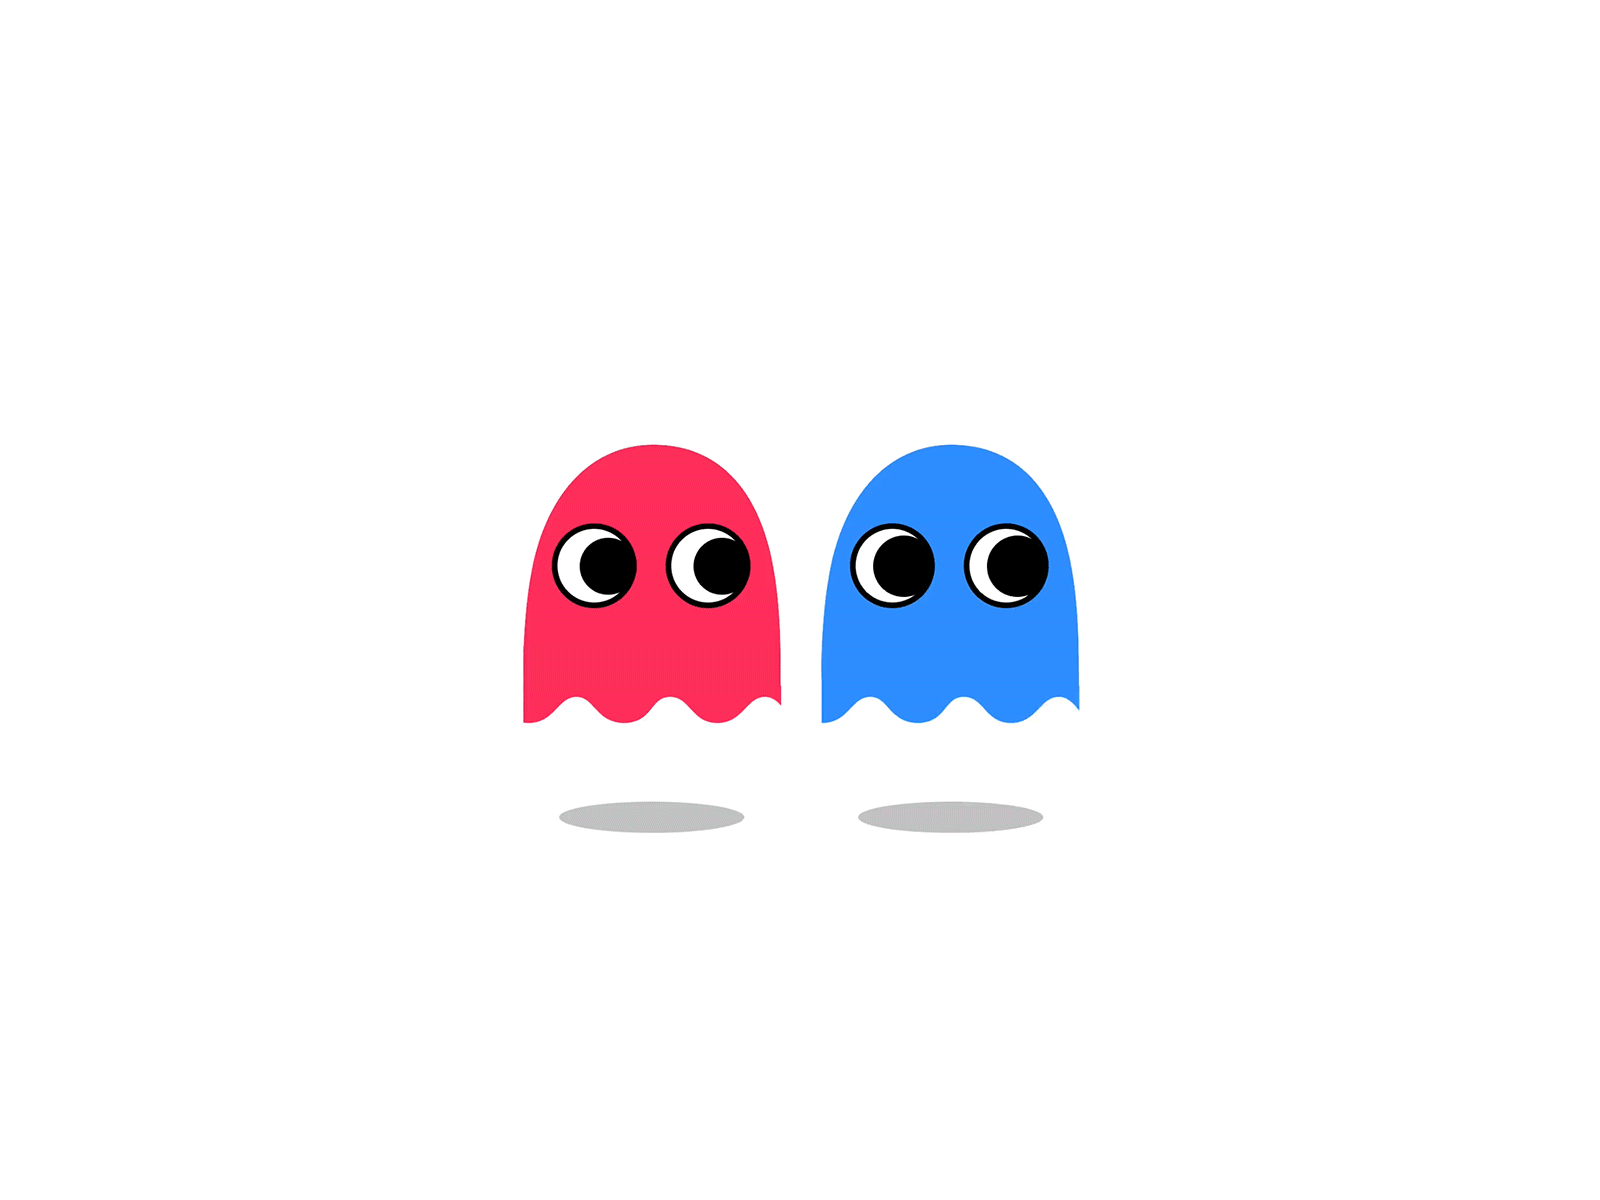 Pacman by Ivonne Audeves on Dribbble